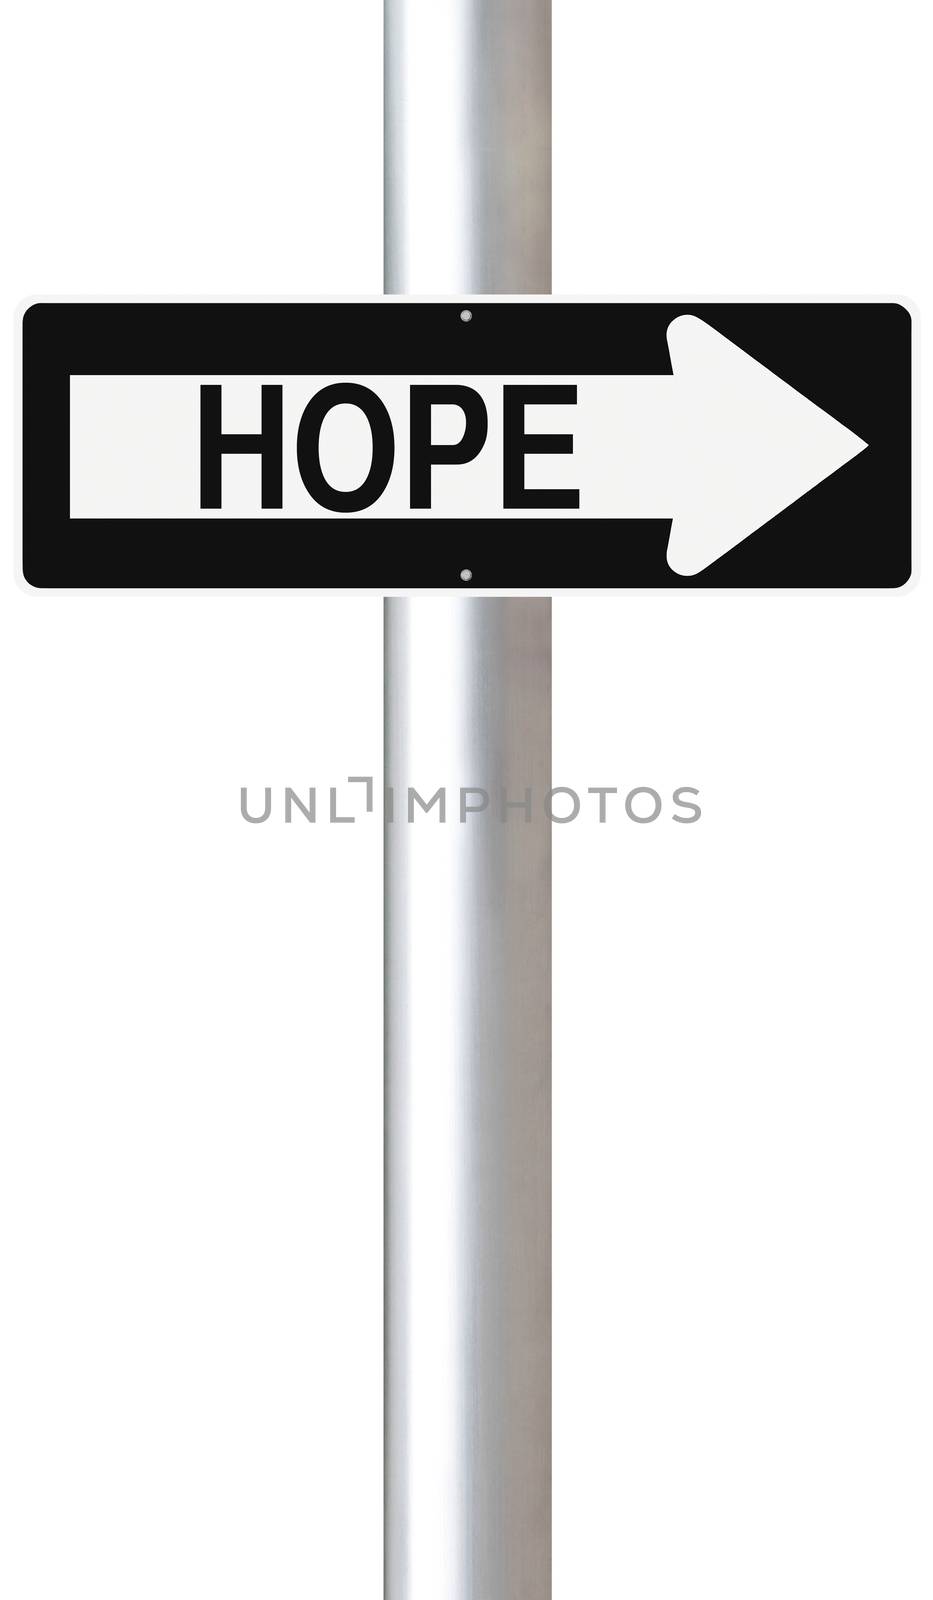 A modified one way sign on Hope